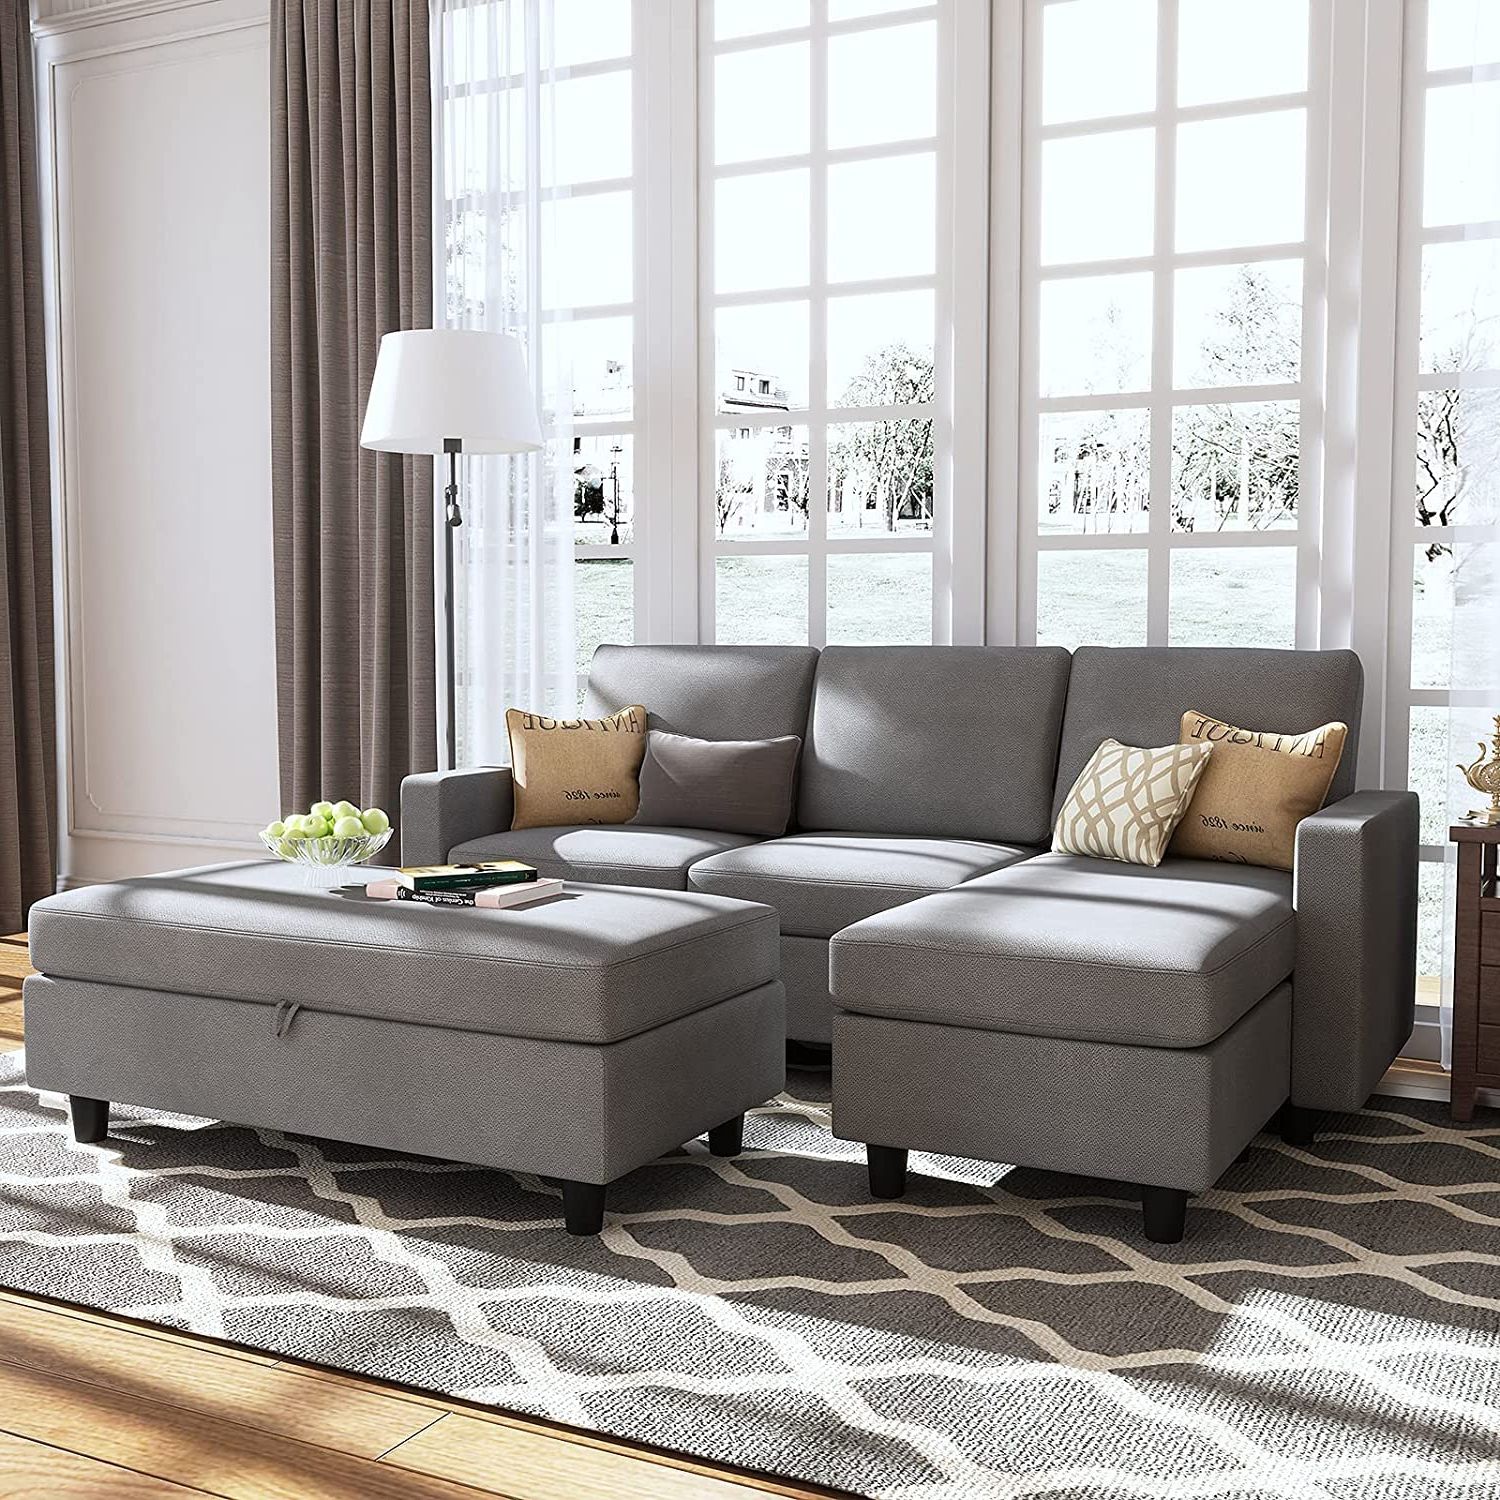 Popular Honbay Grey Sectional Couch With Ottoman, Convertible L Shaped Chaise Inside Convertible L Shaped Sectional Sofas (View 12 of 15)